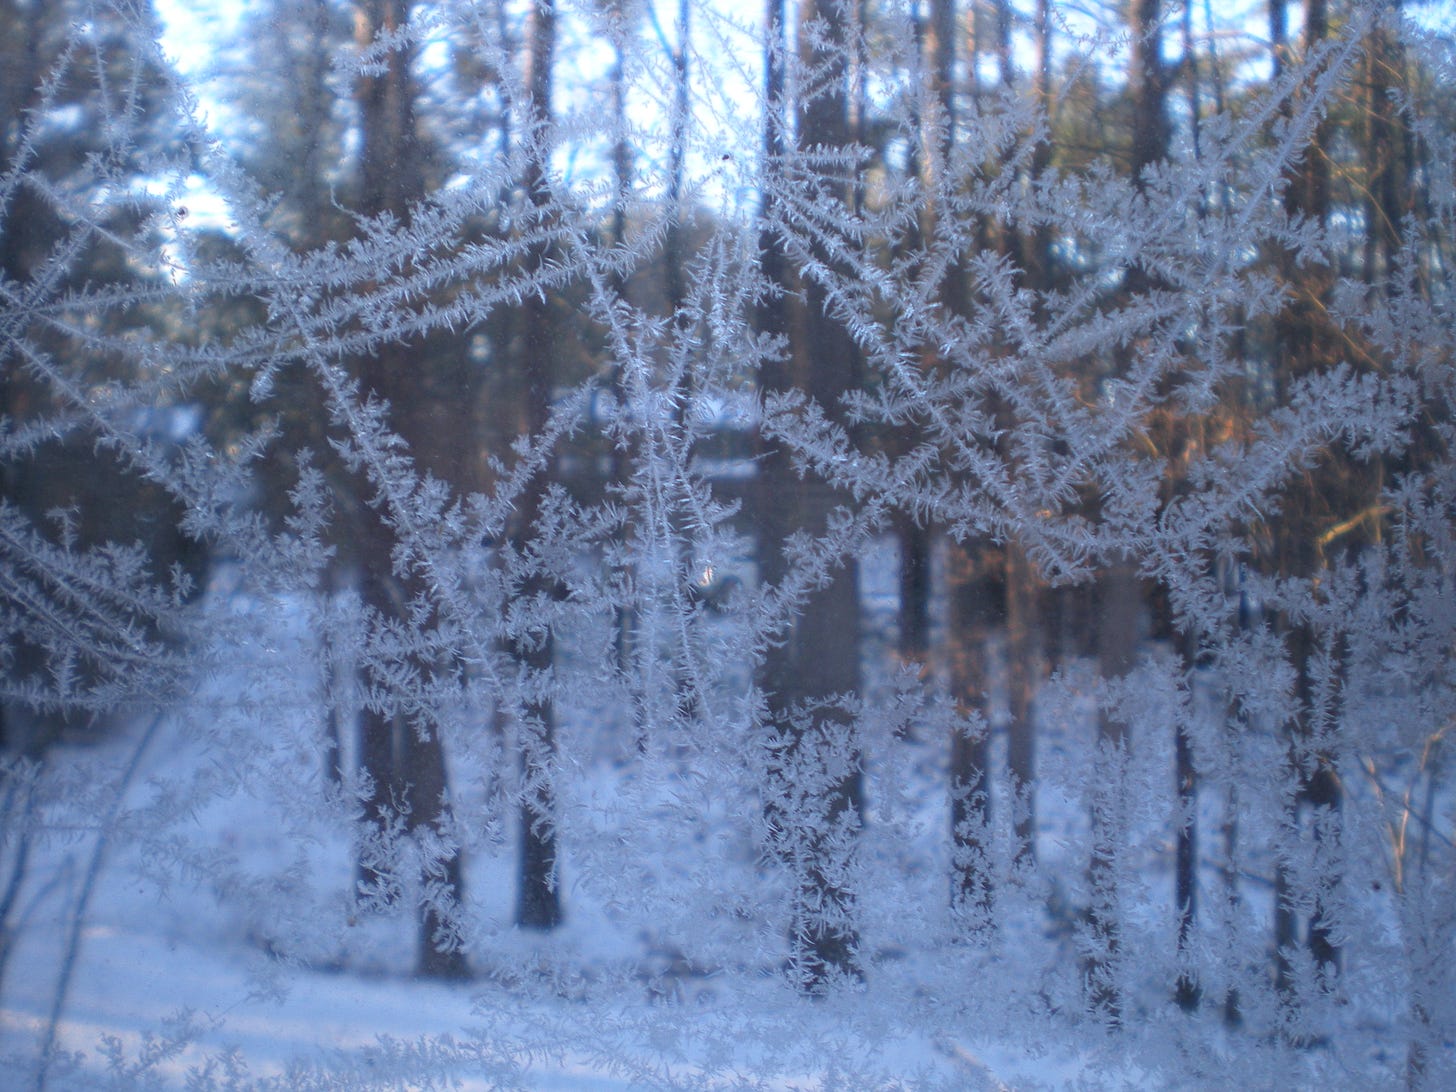 Frost branches across a window looking out on a snowy landscape with tall trees in the foreground.